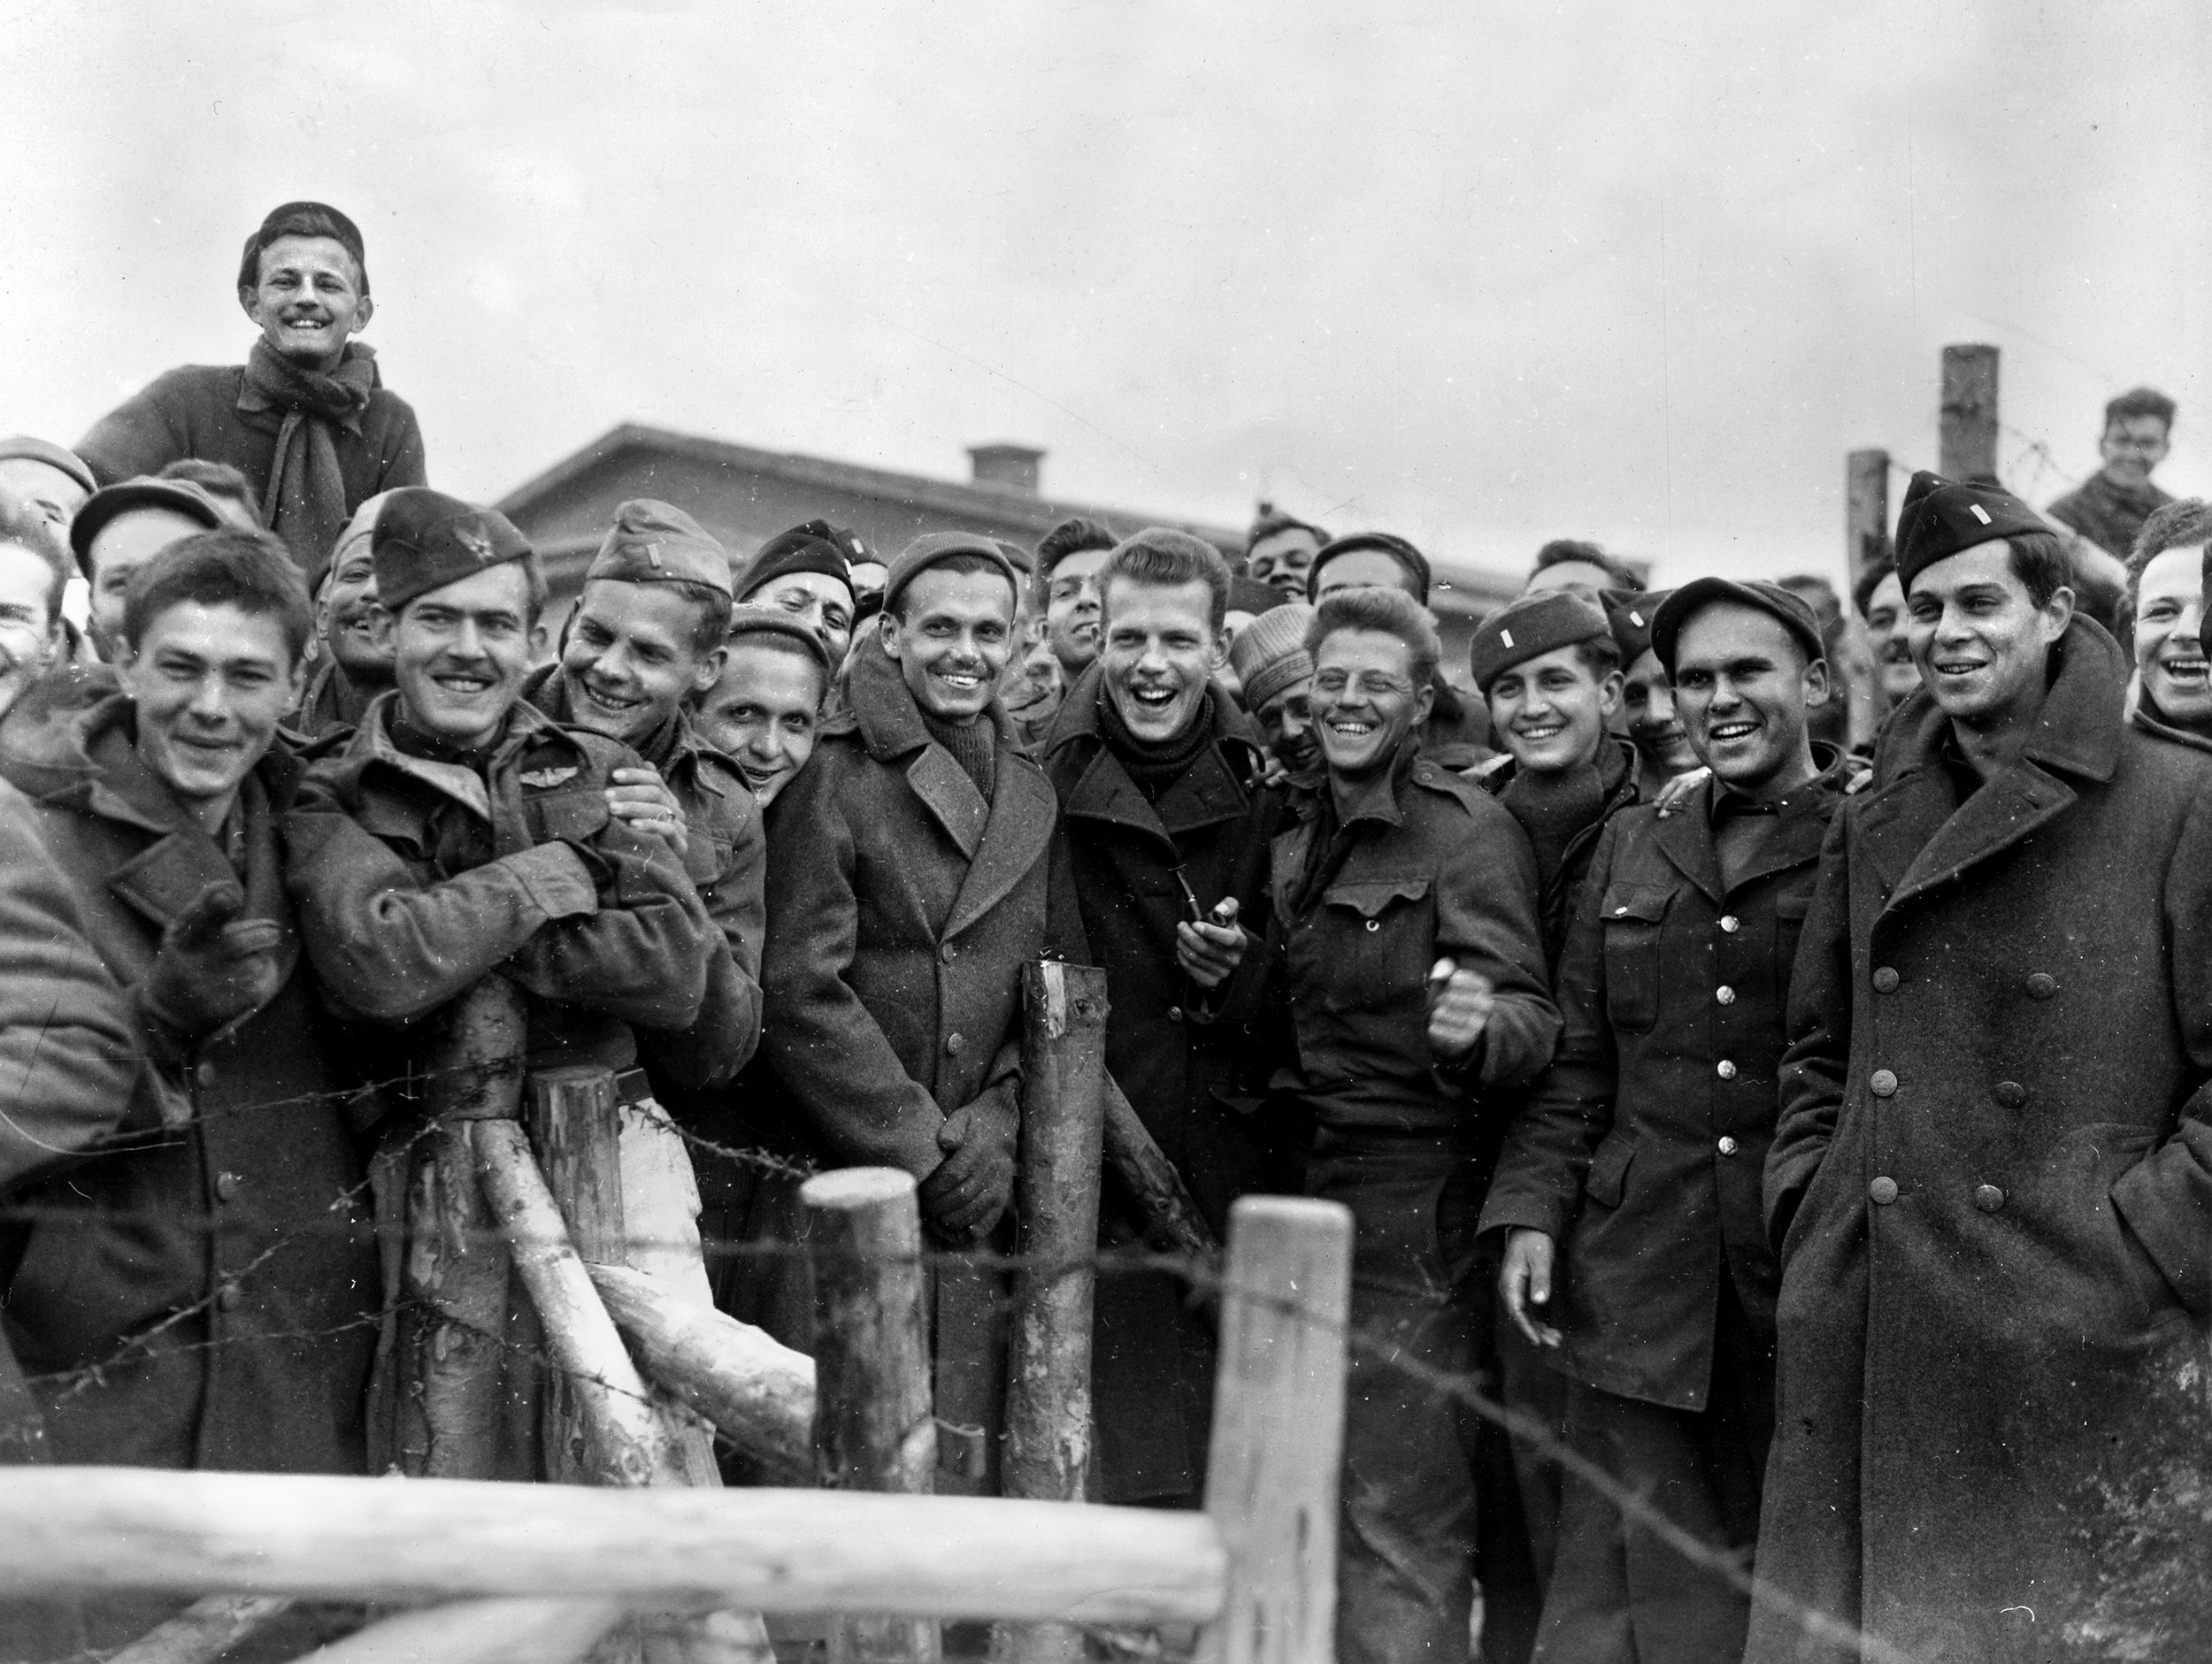 American POWs at Stalag VII-A react with joy at their liberation on April 29, 1945, by elements of the 14th U.S. Armored Division. General Patton soon arrived and saluted Ben Ernst as he walked through the liberated camp; Ernst never forgot the gesture.